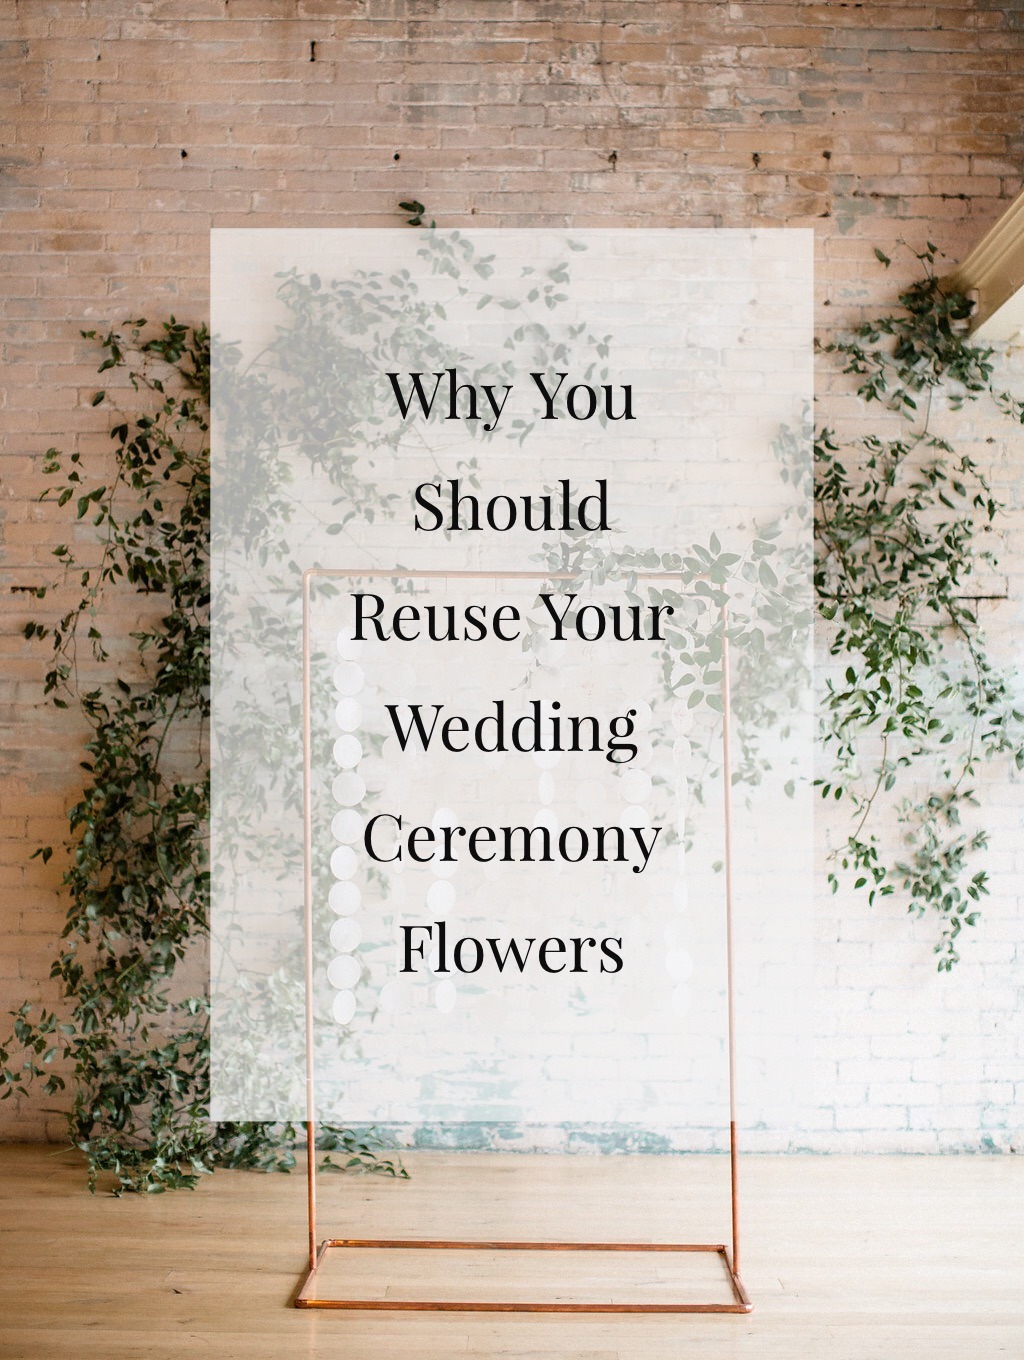 Why You Should Reuse Your Wedding Ceremony Flowers